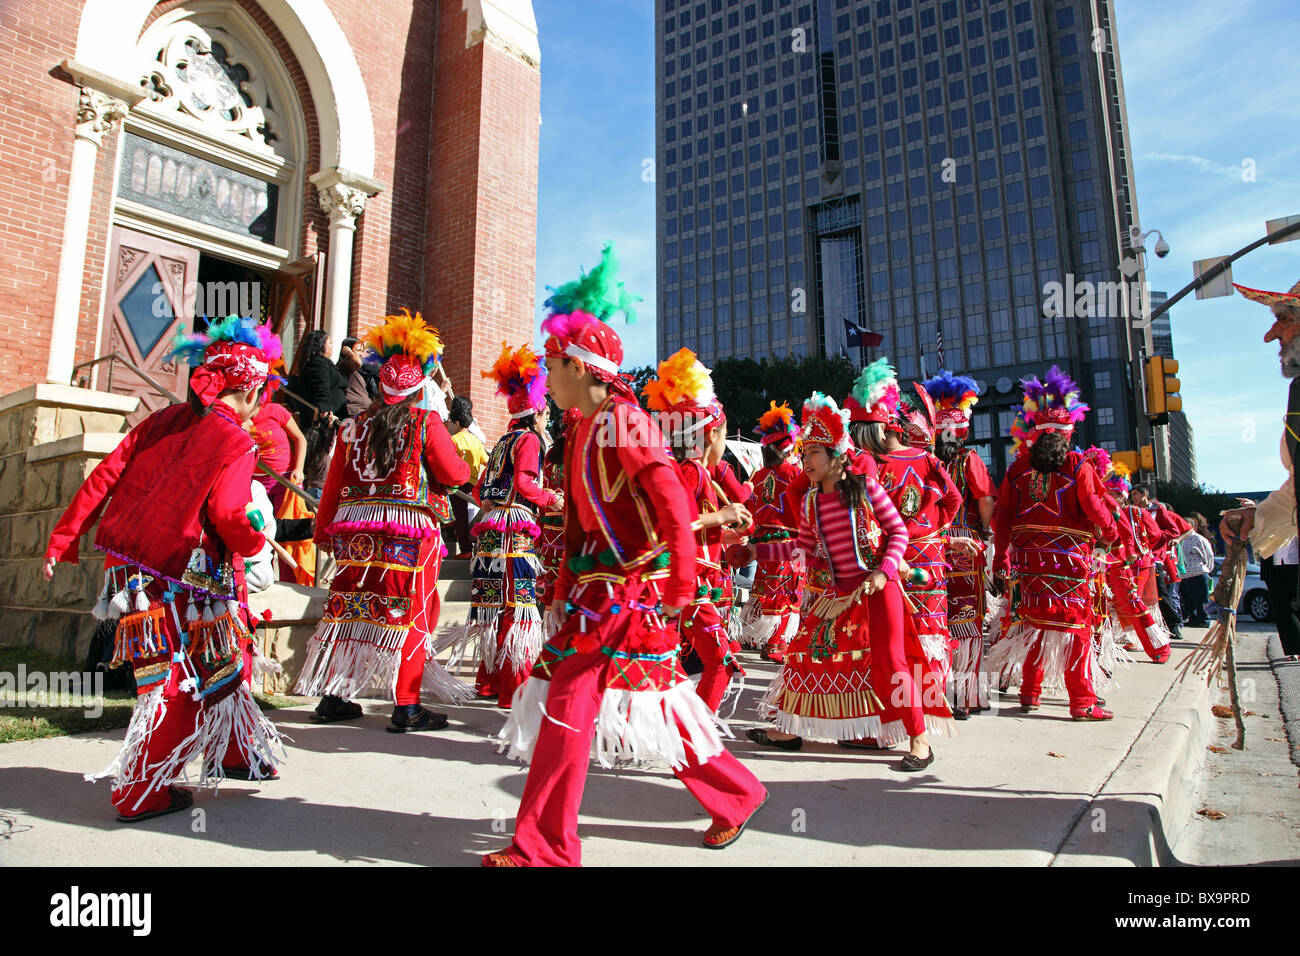 Mexican Festival, Cathedral at the Arts District, Dallas, Texas Stock Photo